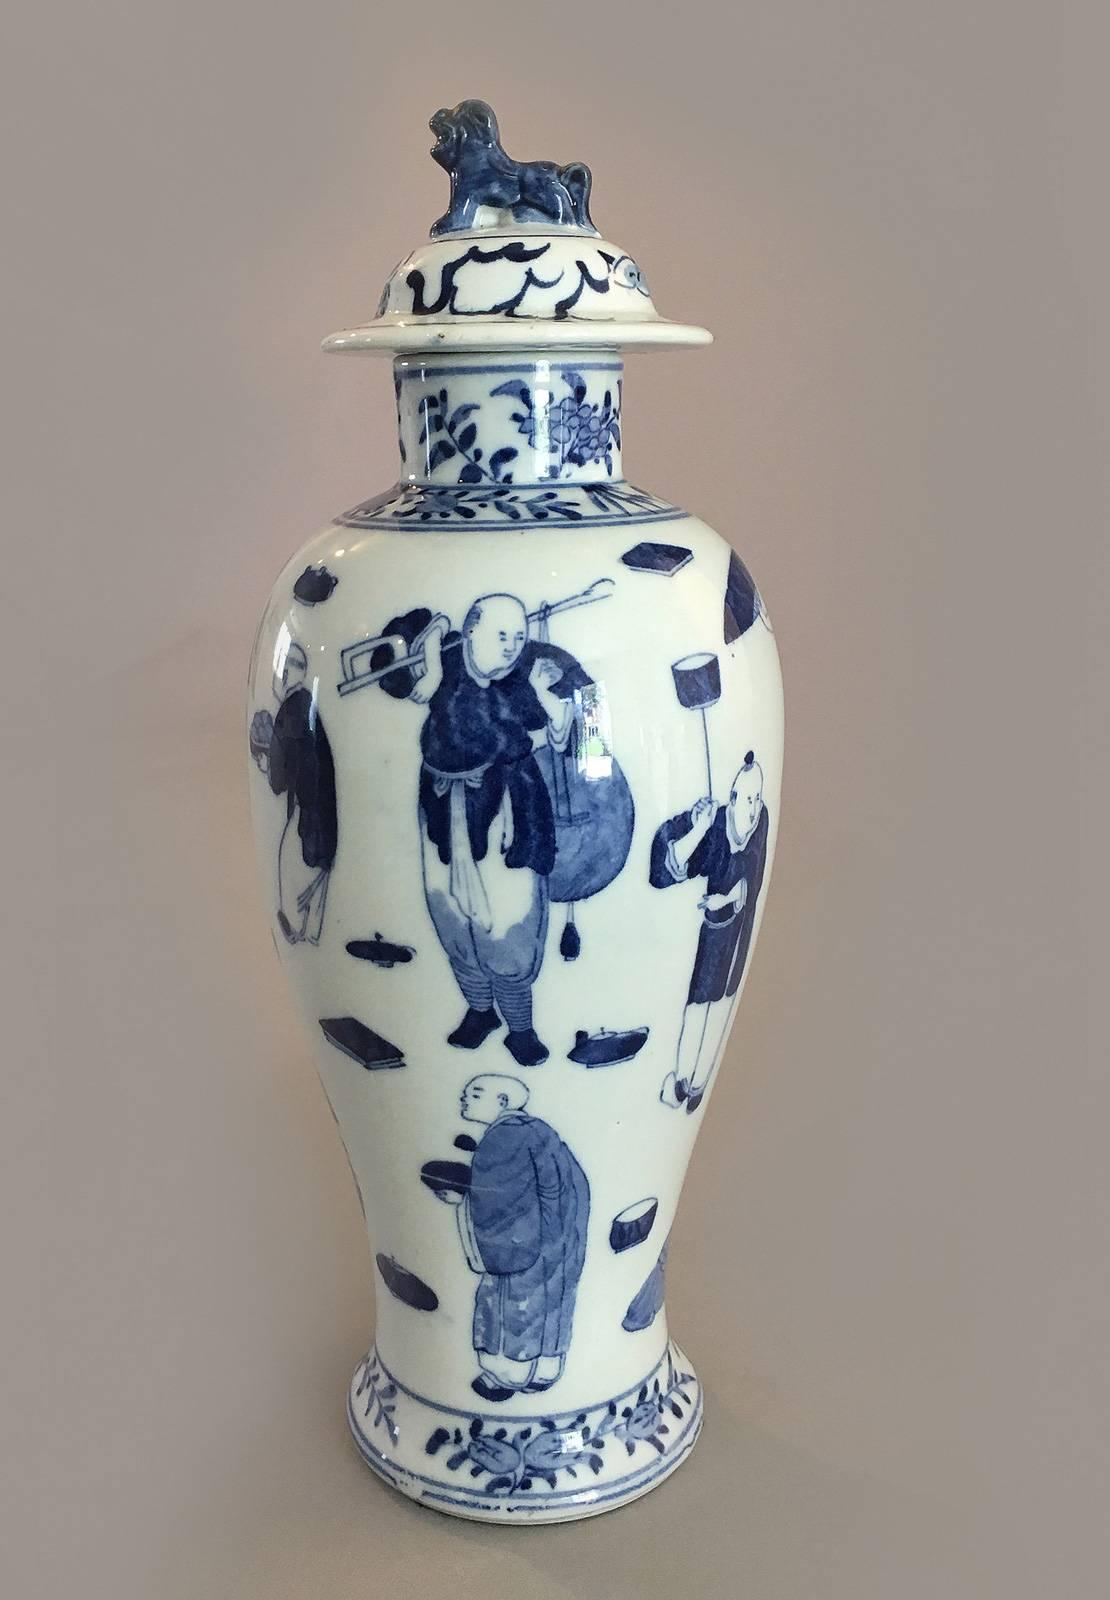 Chinese export porcelain blue and white baluster-shaped vase and cover with foo dog finial. It is decorated with male figures in various pursuits: one dancing holding a fan and sword, one holding the hand of a child, one carrying a stack of round